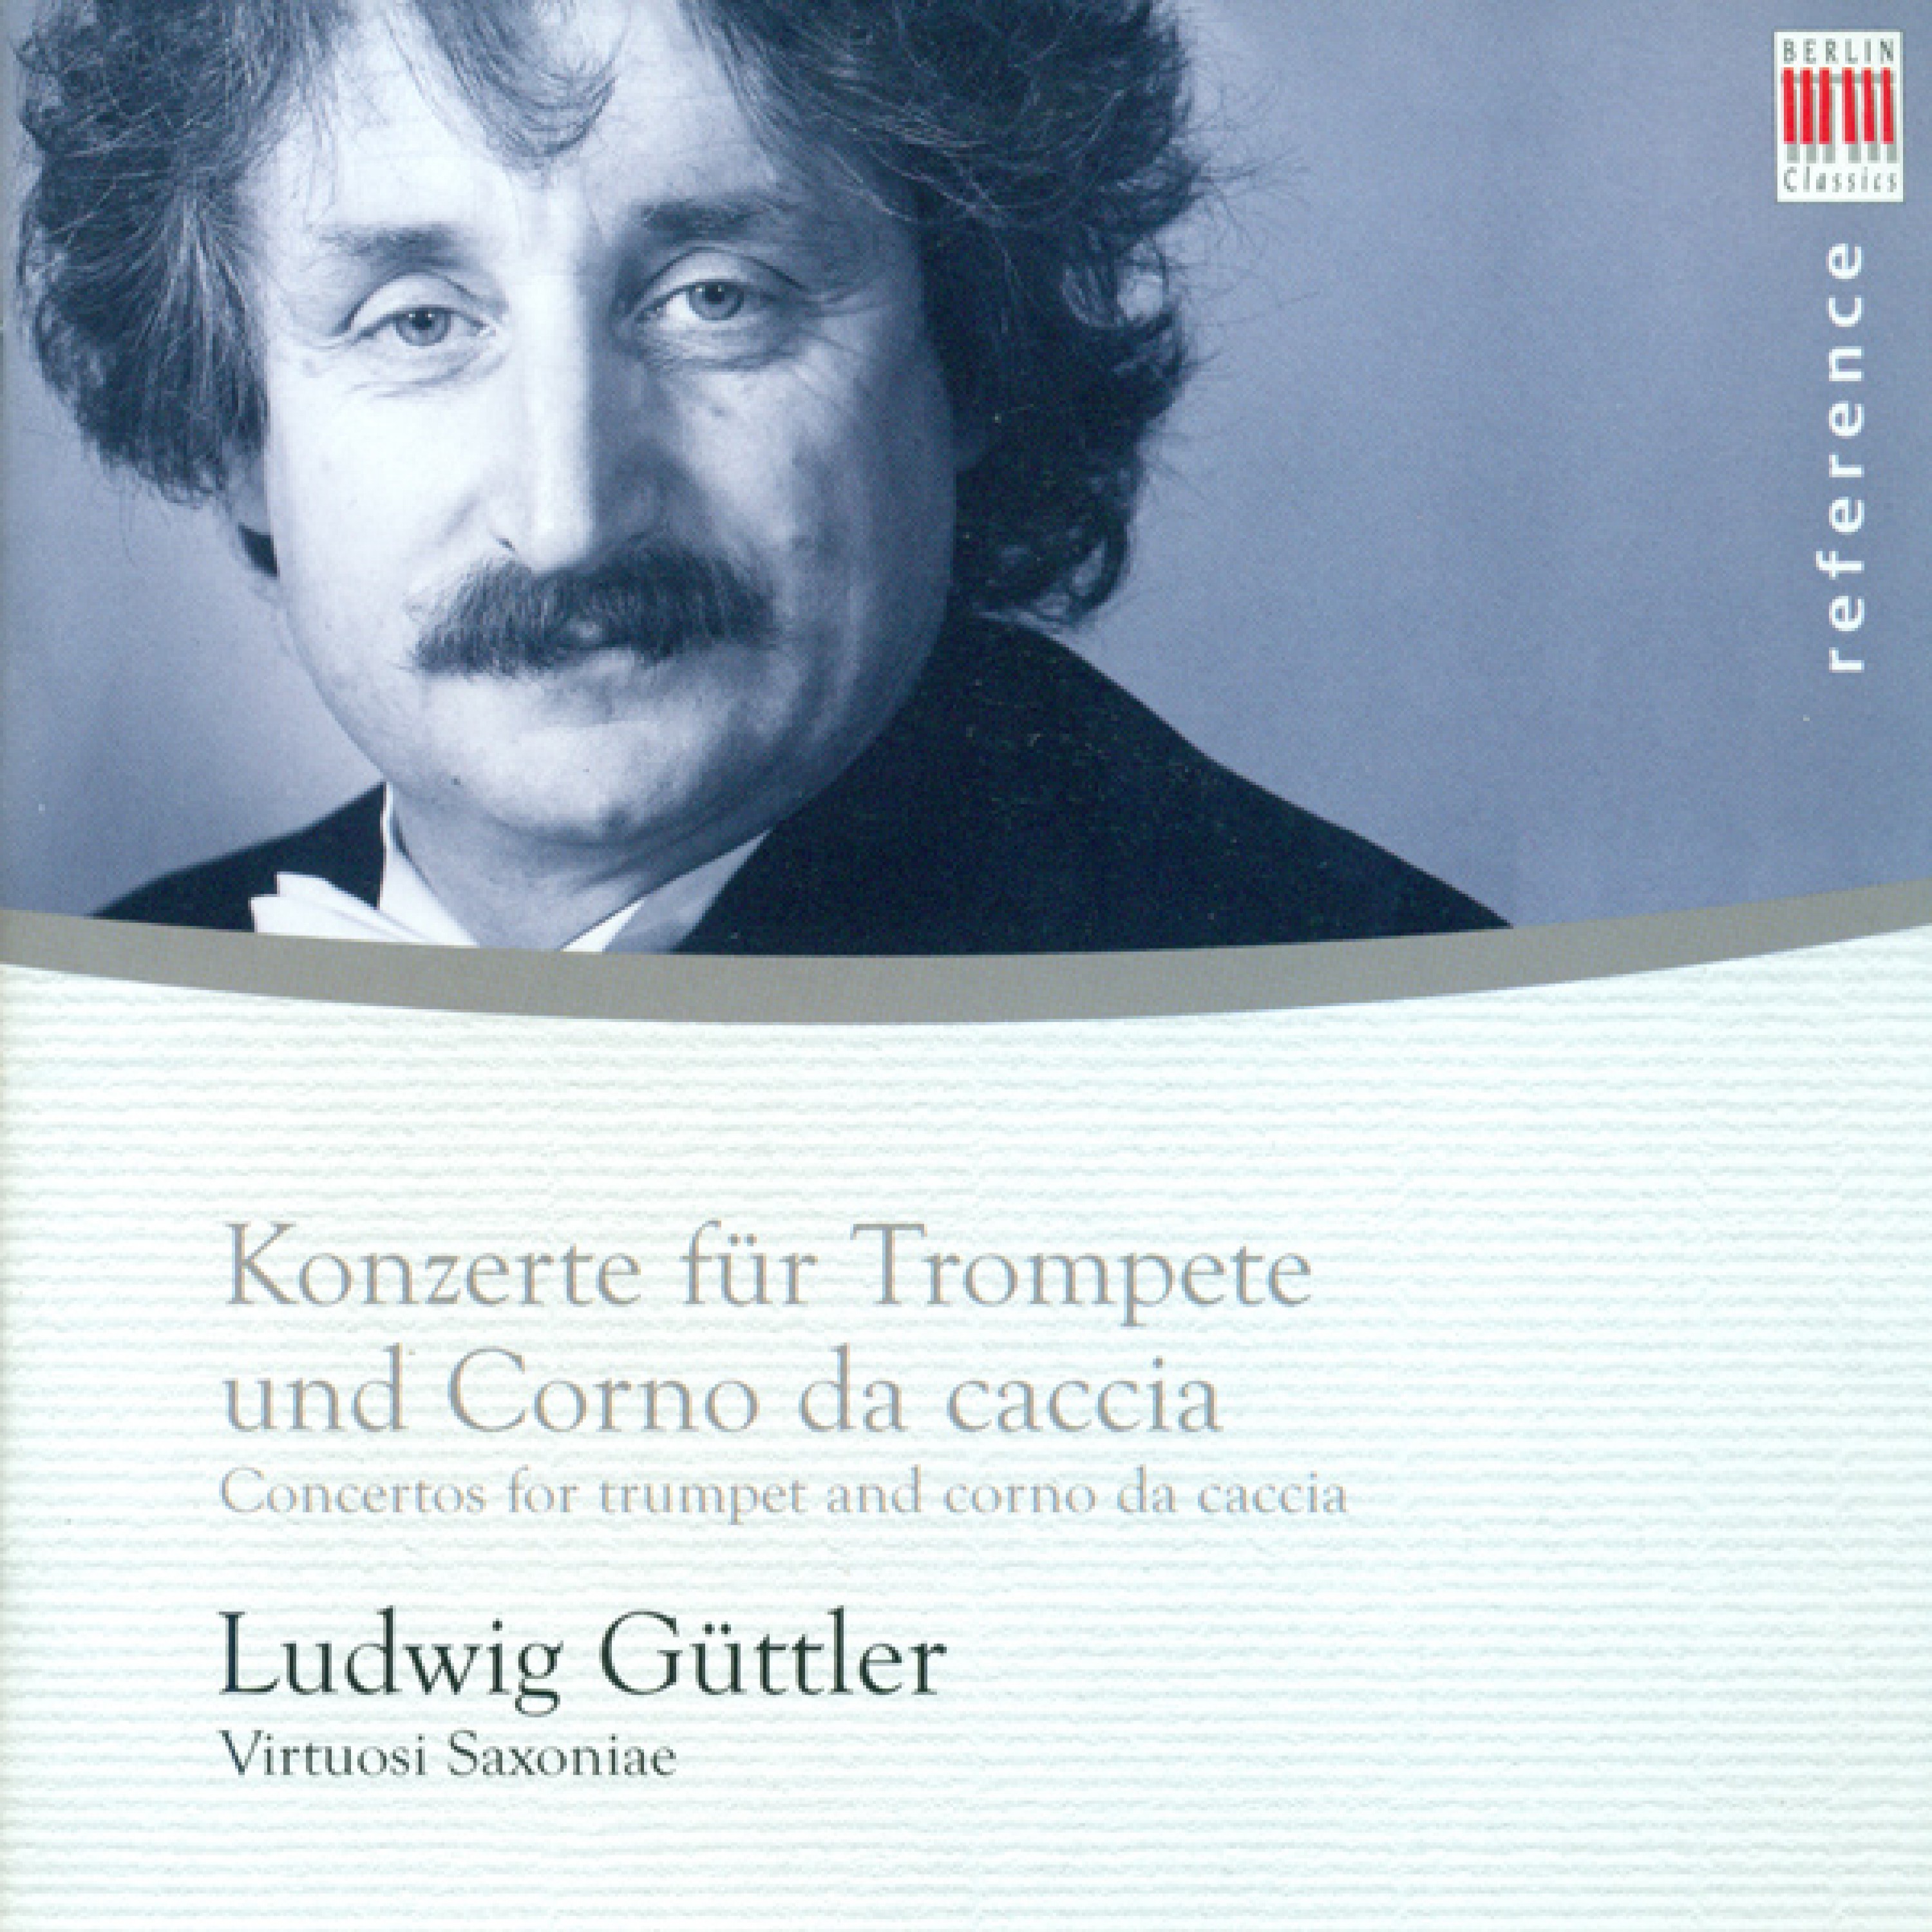 Concerto for Trumpet and Oboe in E Flat Major: III. Allegro